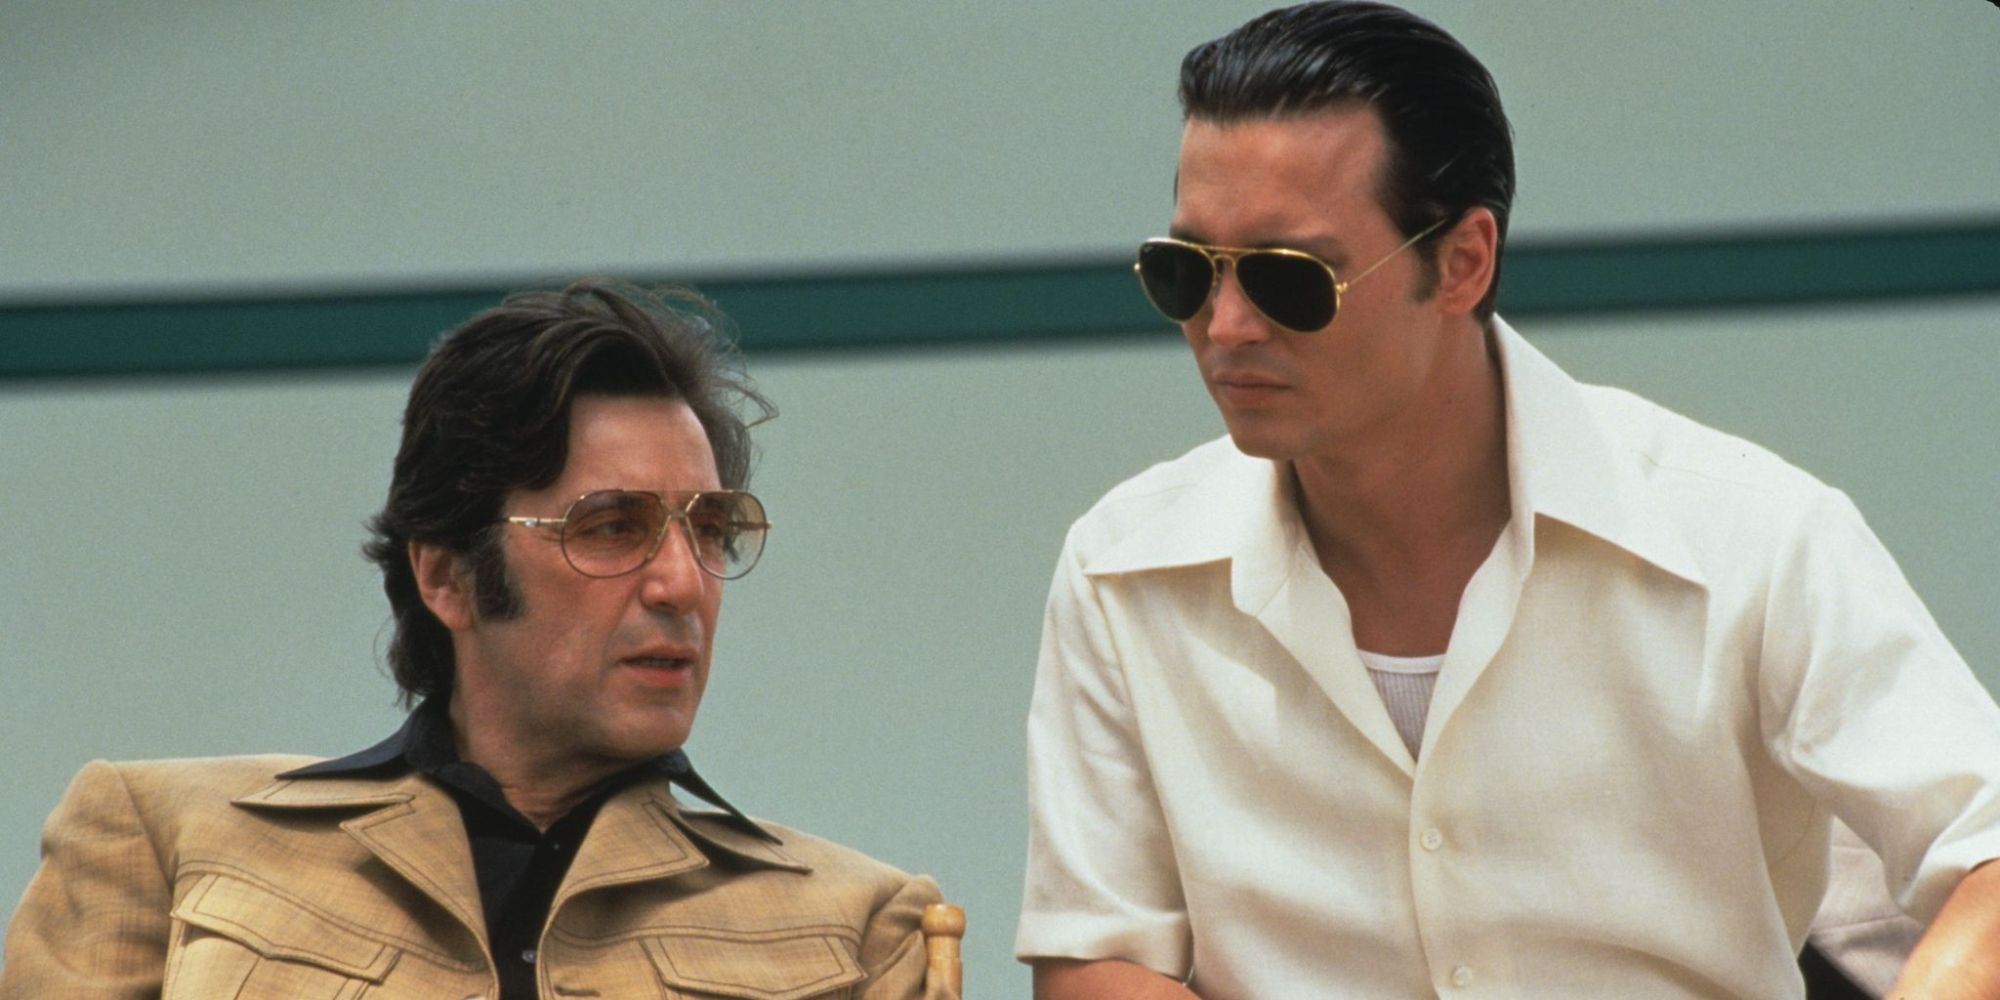 Al Pacino as Lefty sitting next to and speaking with Johnny Depp as Donnie Brasco in Donnie Brasco